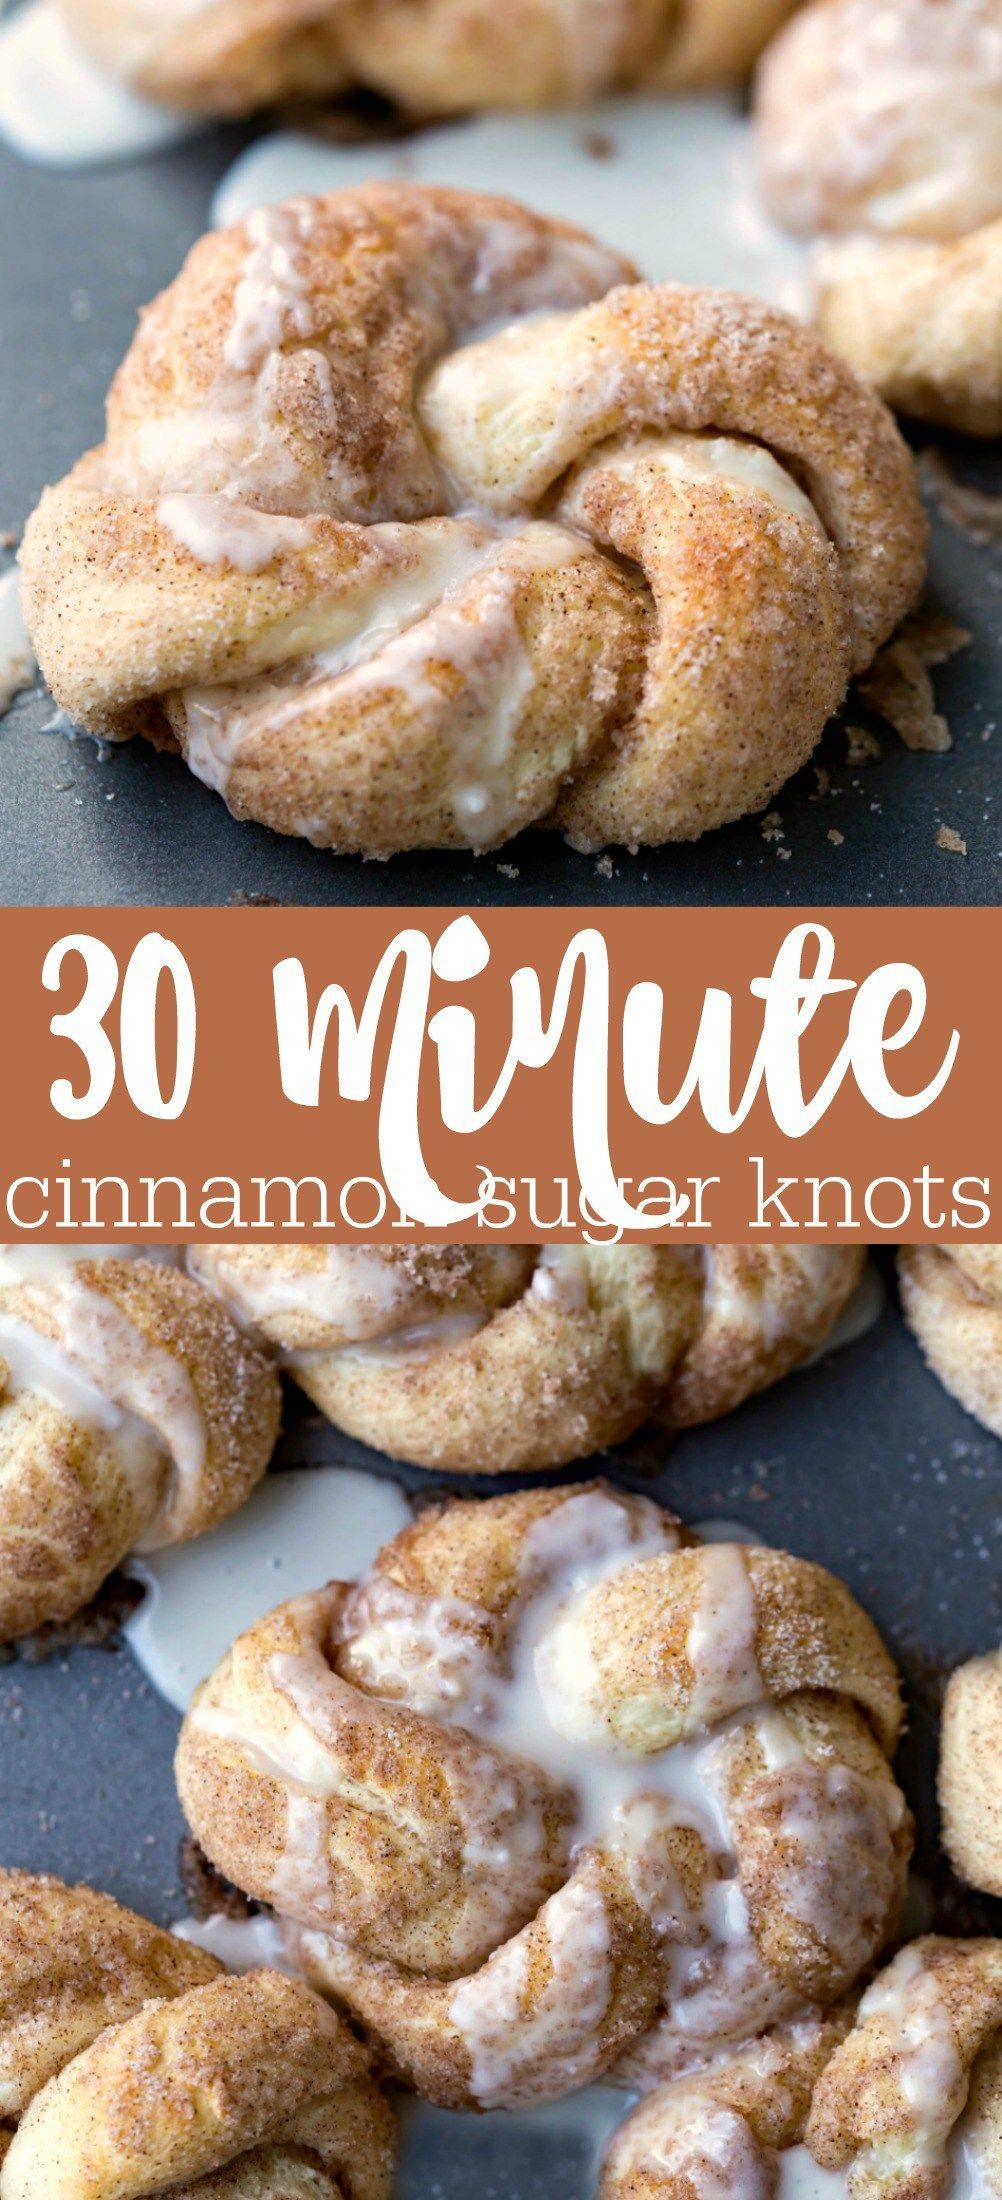 30 Minute Cinnamon Sugar Knots Recipe – made from scratch cinnamon roll sugar knots that are ready in just half an hour. Great